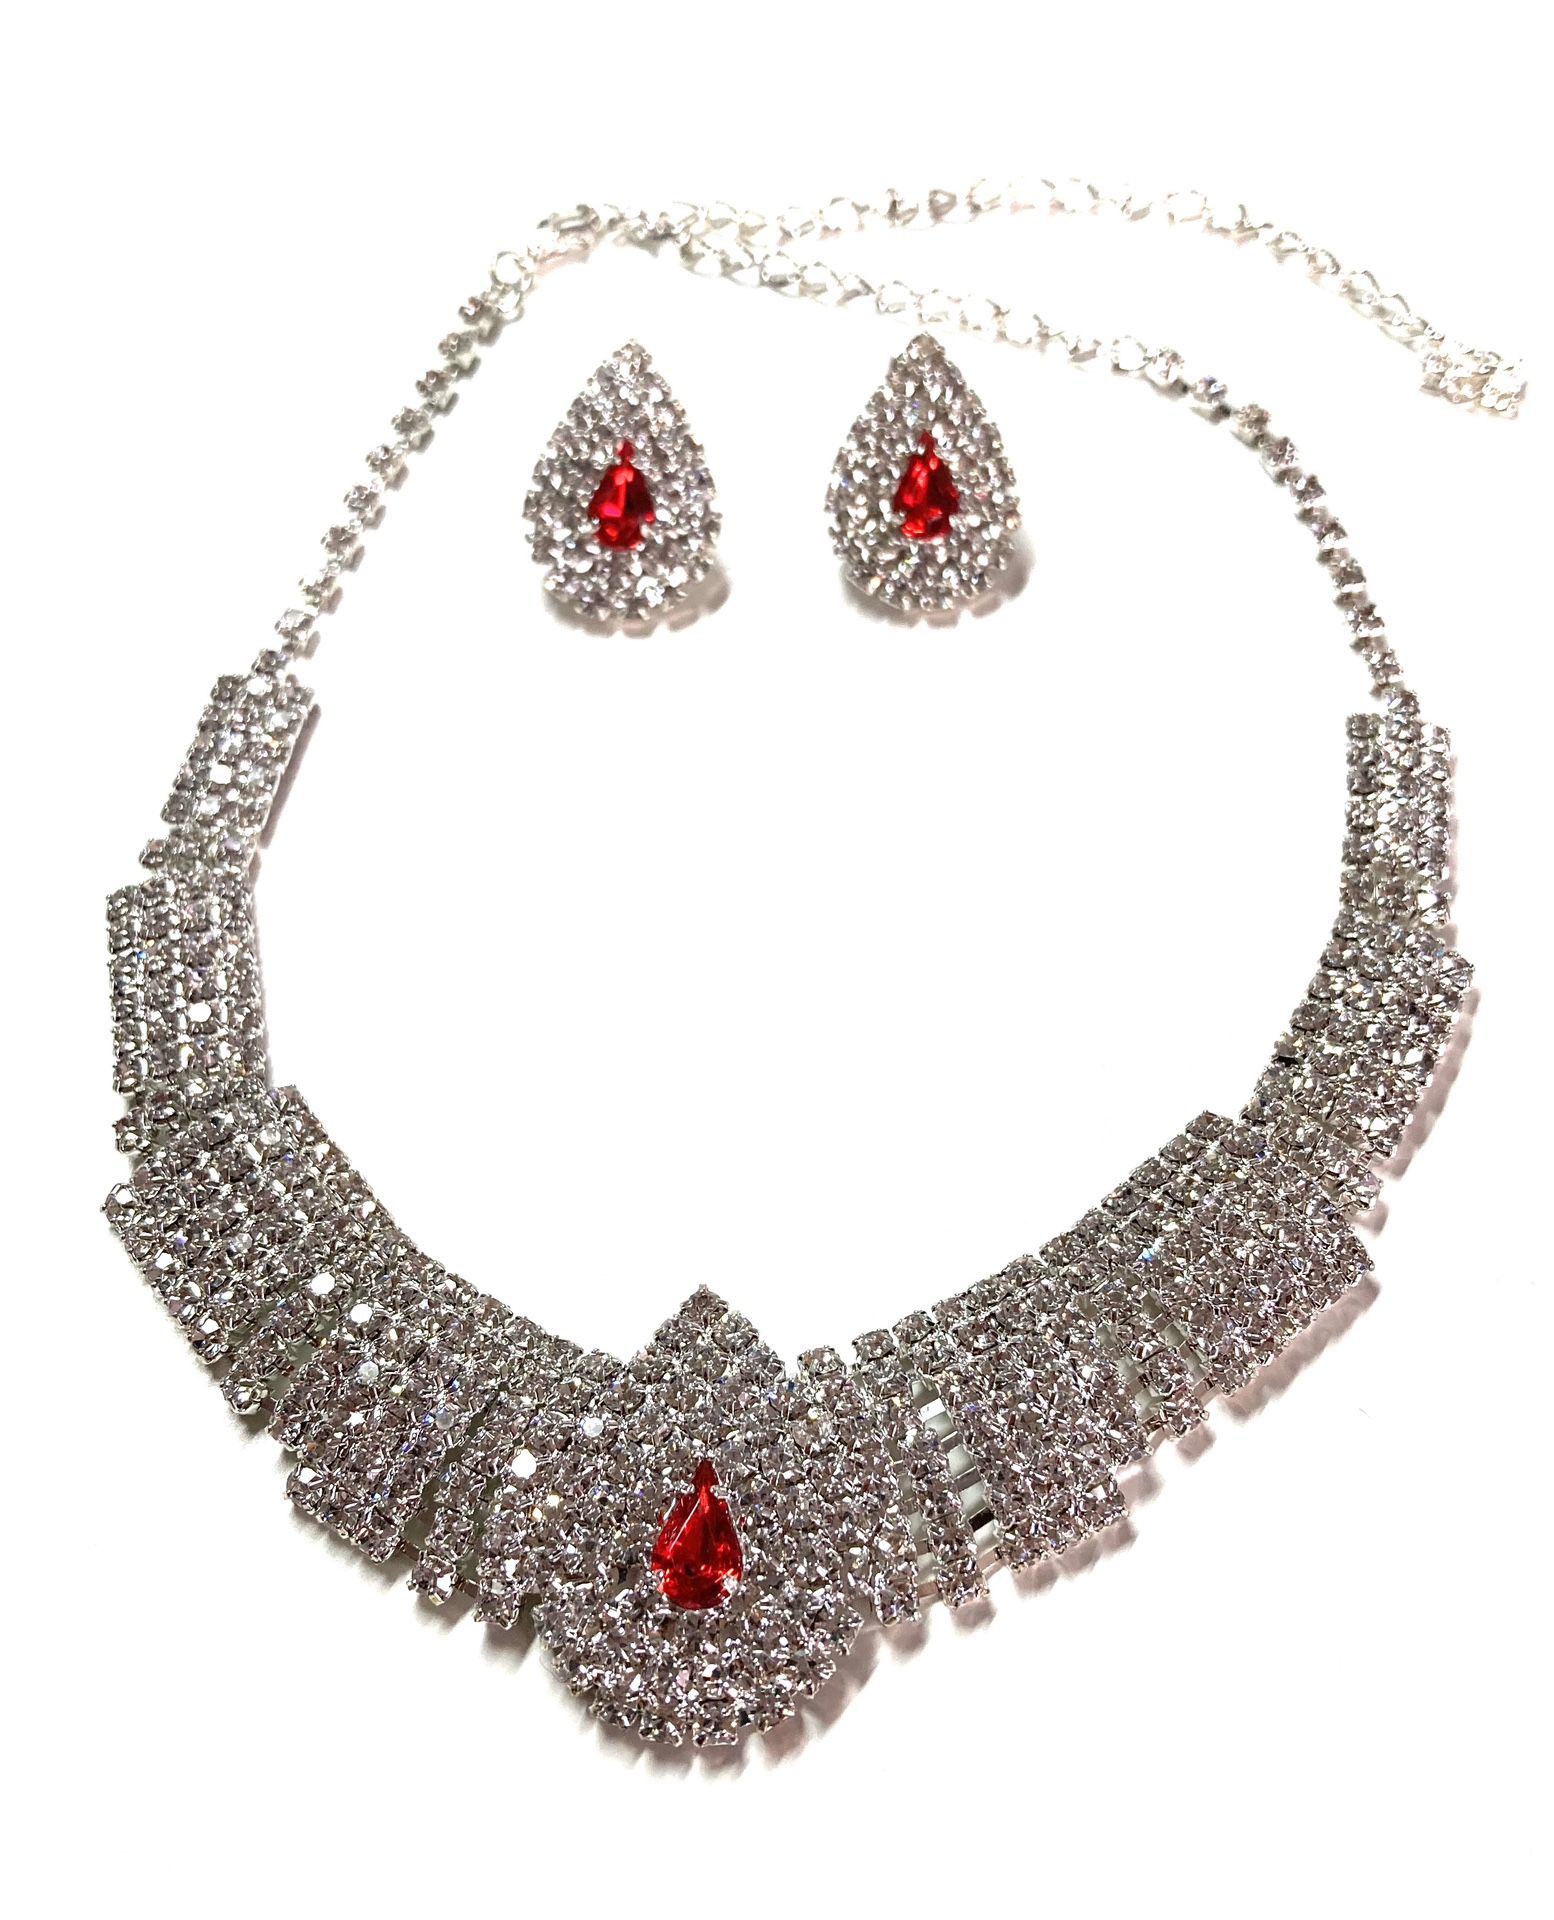 Wedding Cubic Jewelry Earrings And Necklace Set 